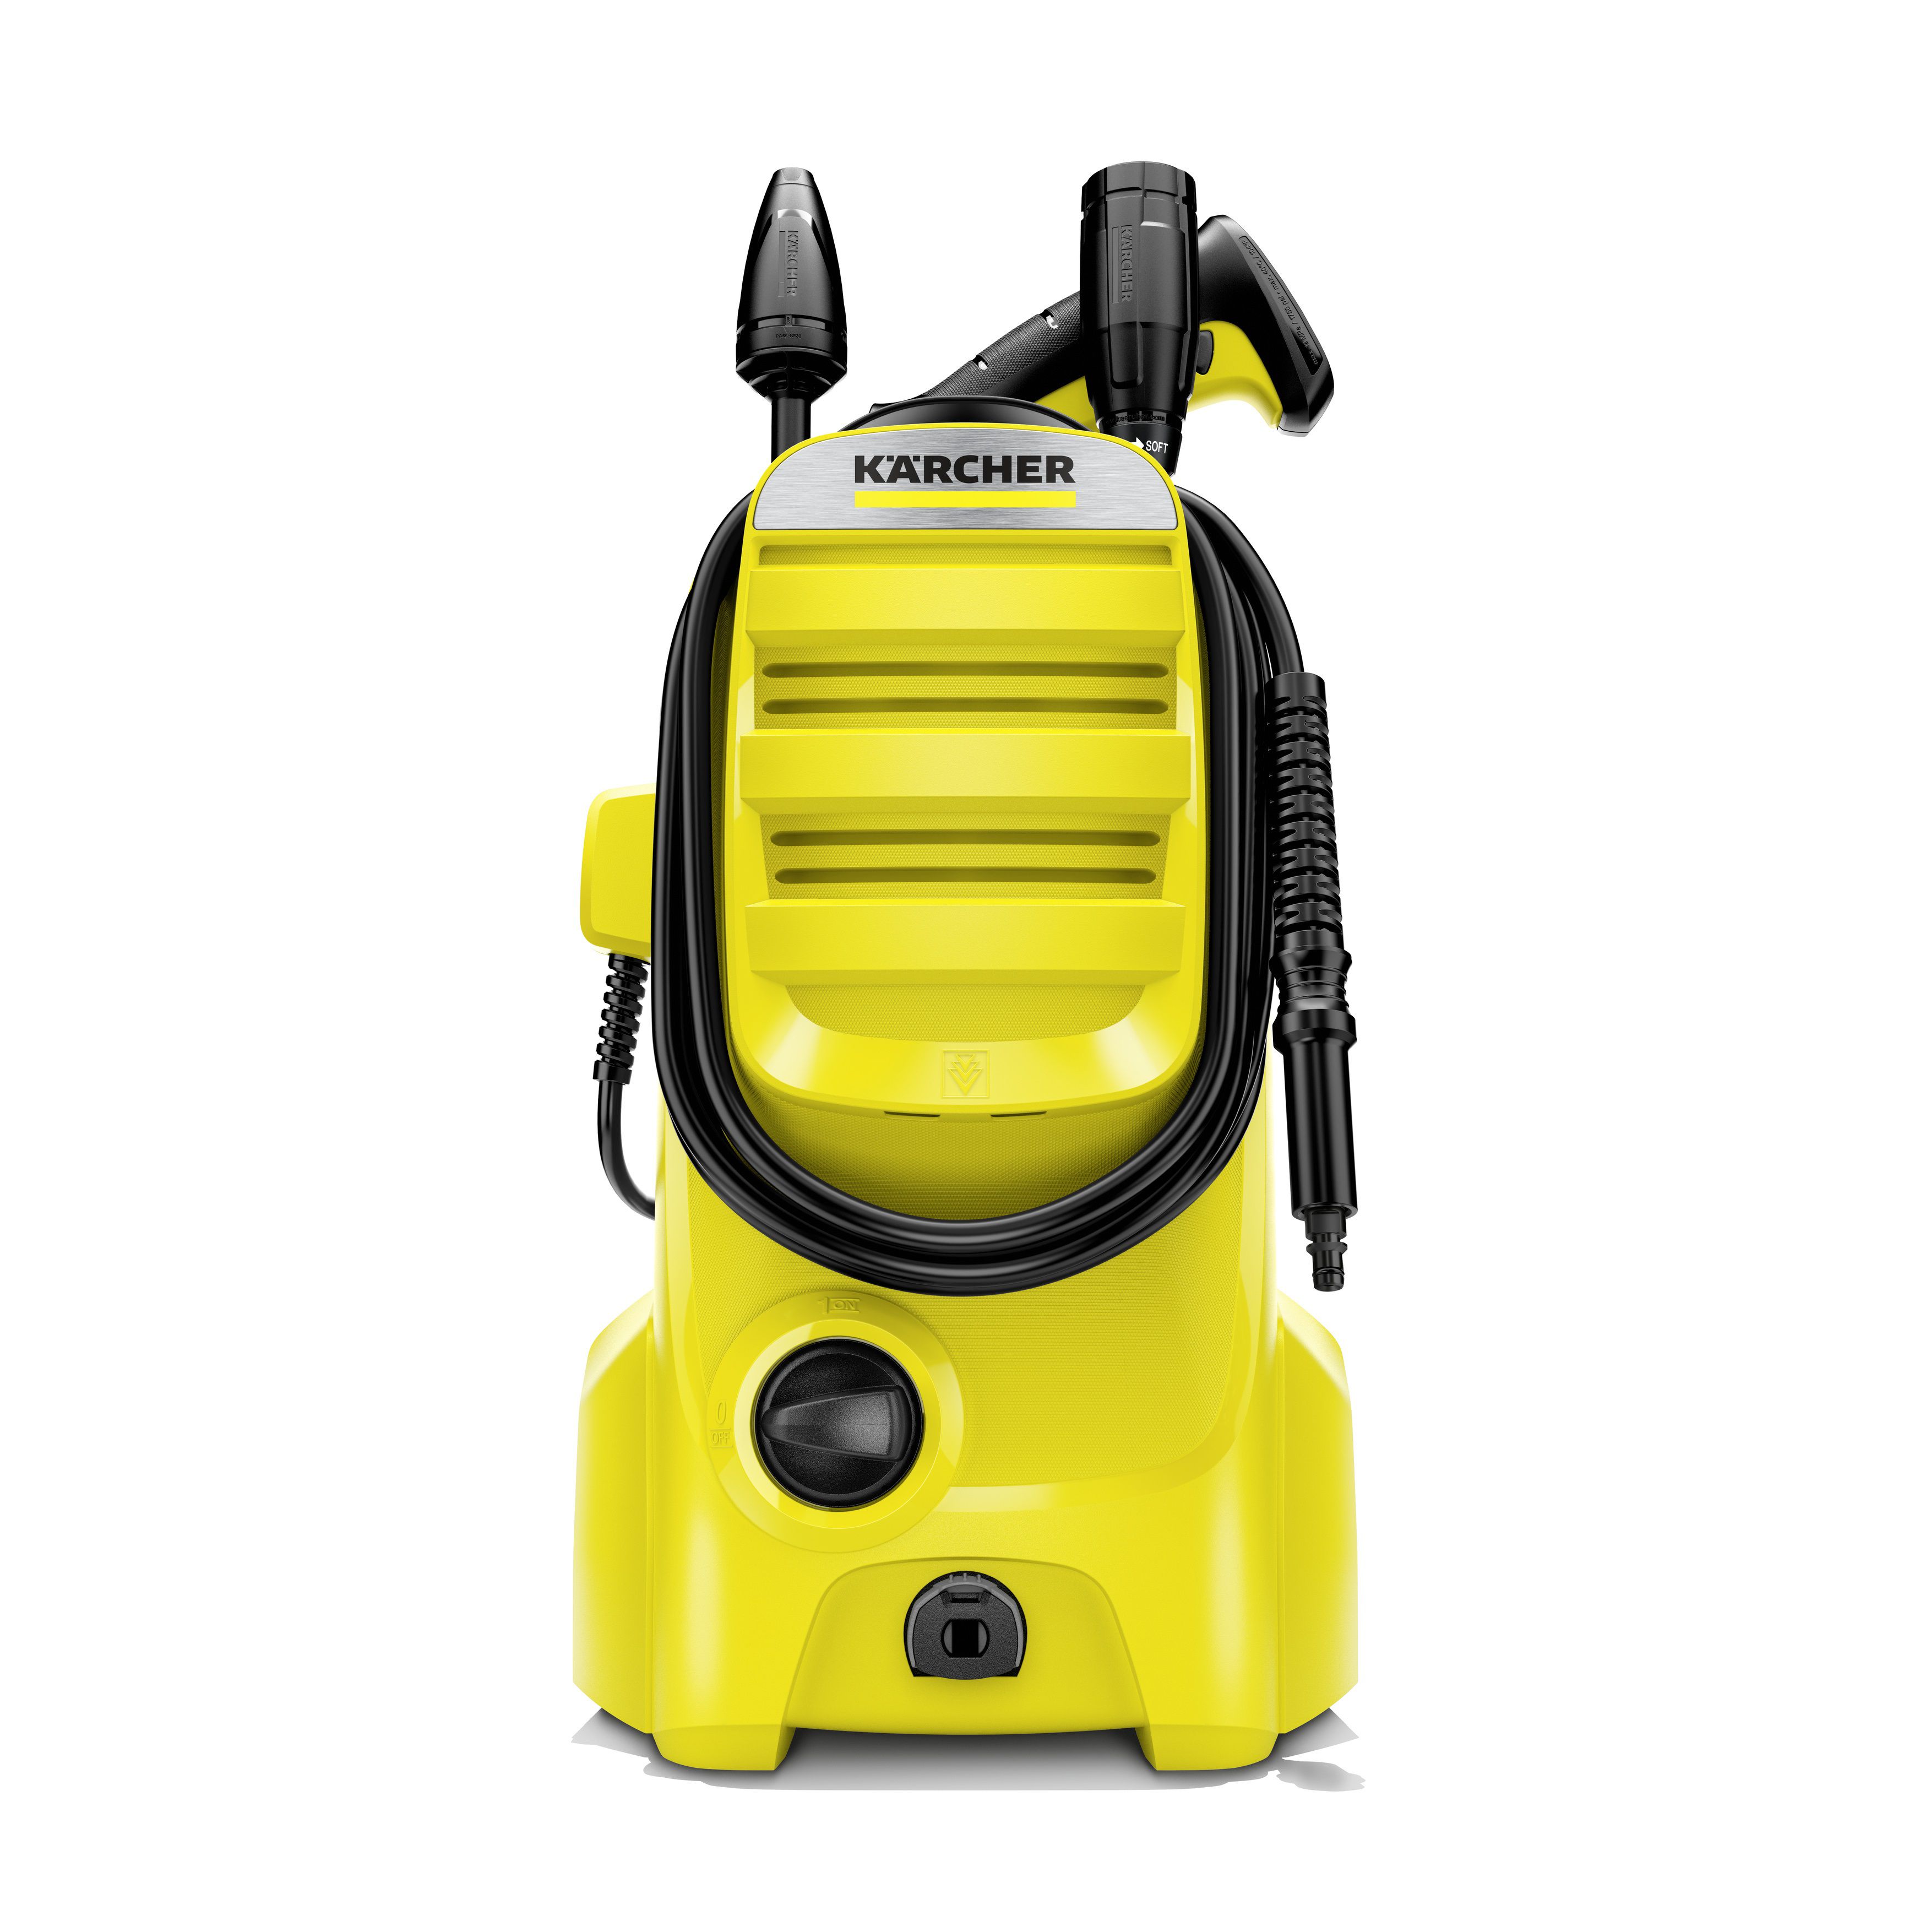 Kärcher K3 Classic Car & Home Corded Pressure washer 1.6kW 16762240